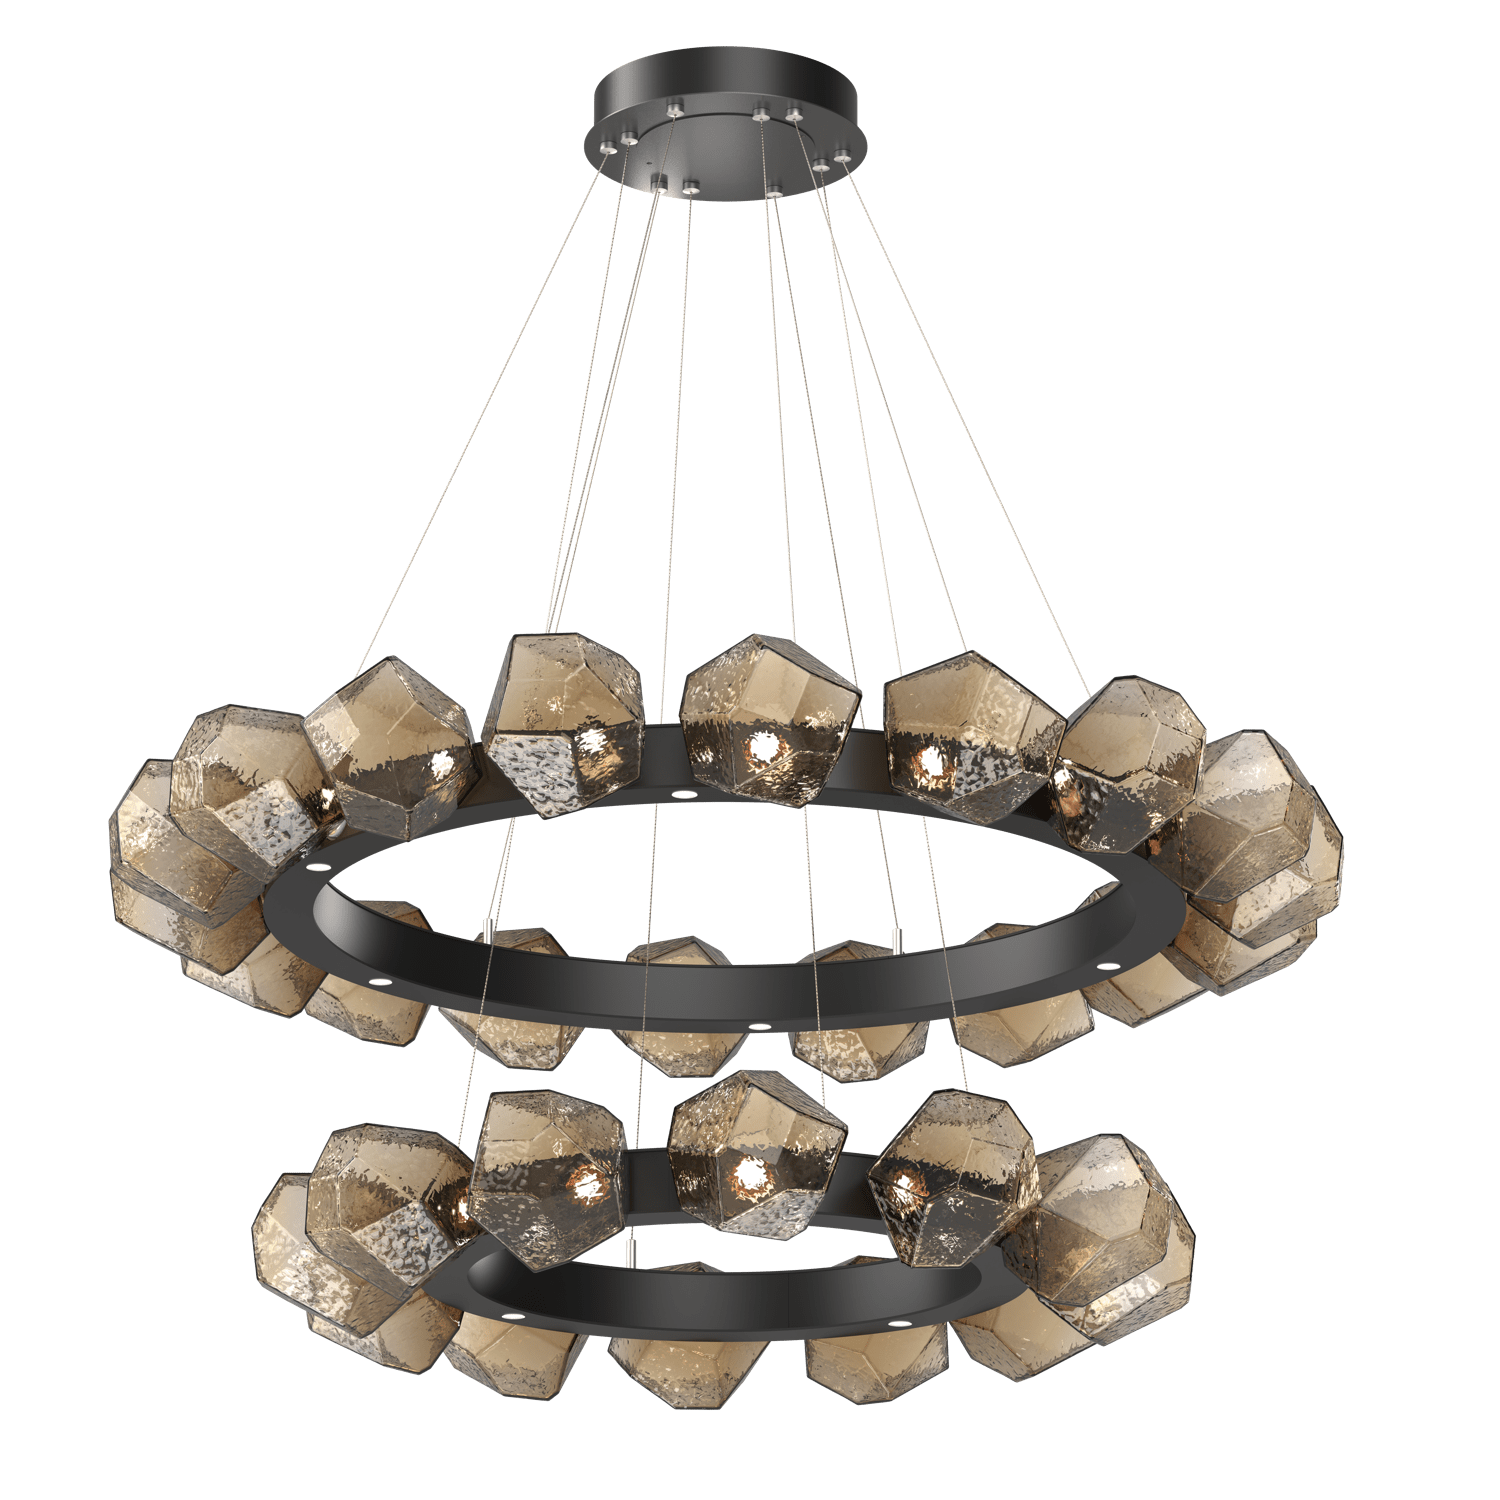 CHB0039-2T-MB-B-Hammerton-Studio-Gem-48-inch-two-tier-radial-ring-chandelier-with-matte-black-finish-and-bronze-blown-glass-shades-and-LED-lamping